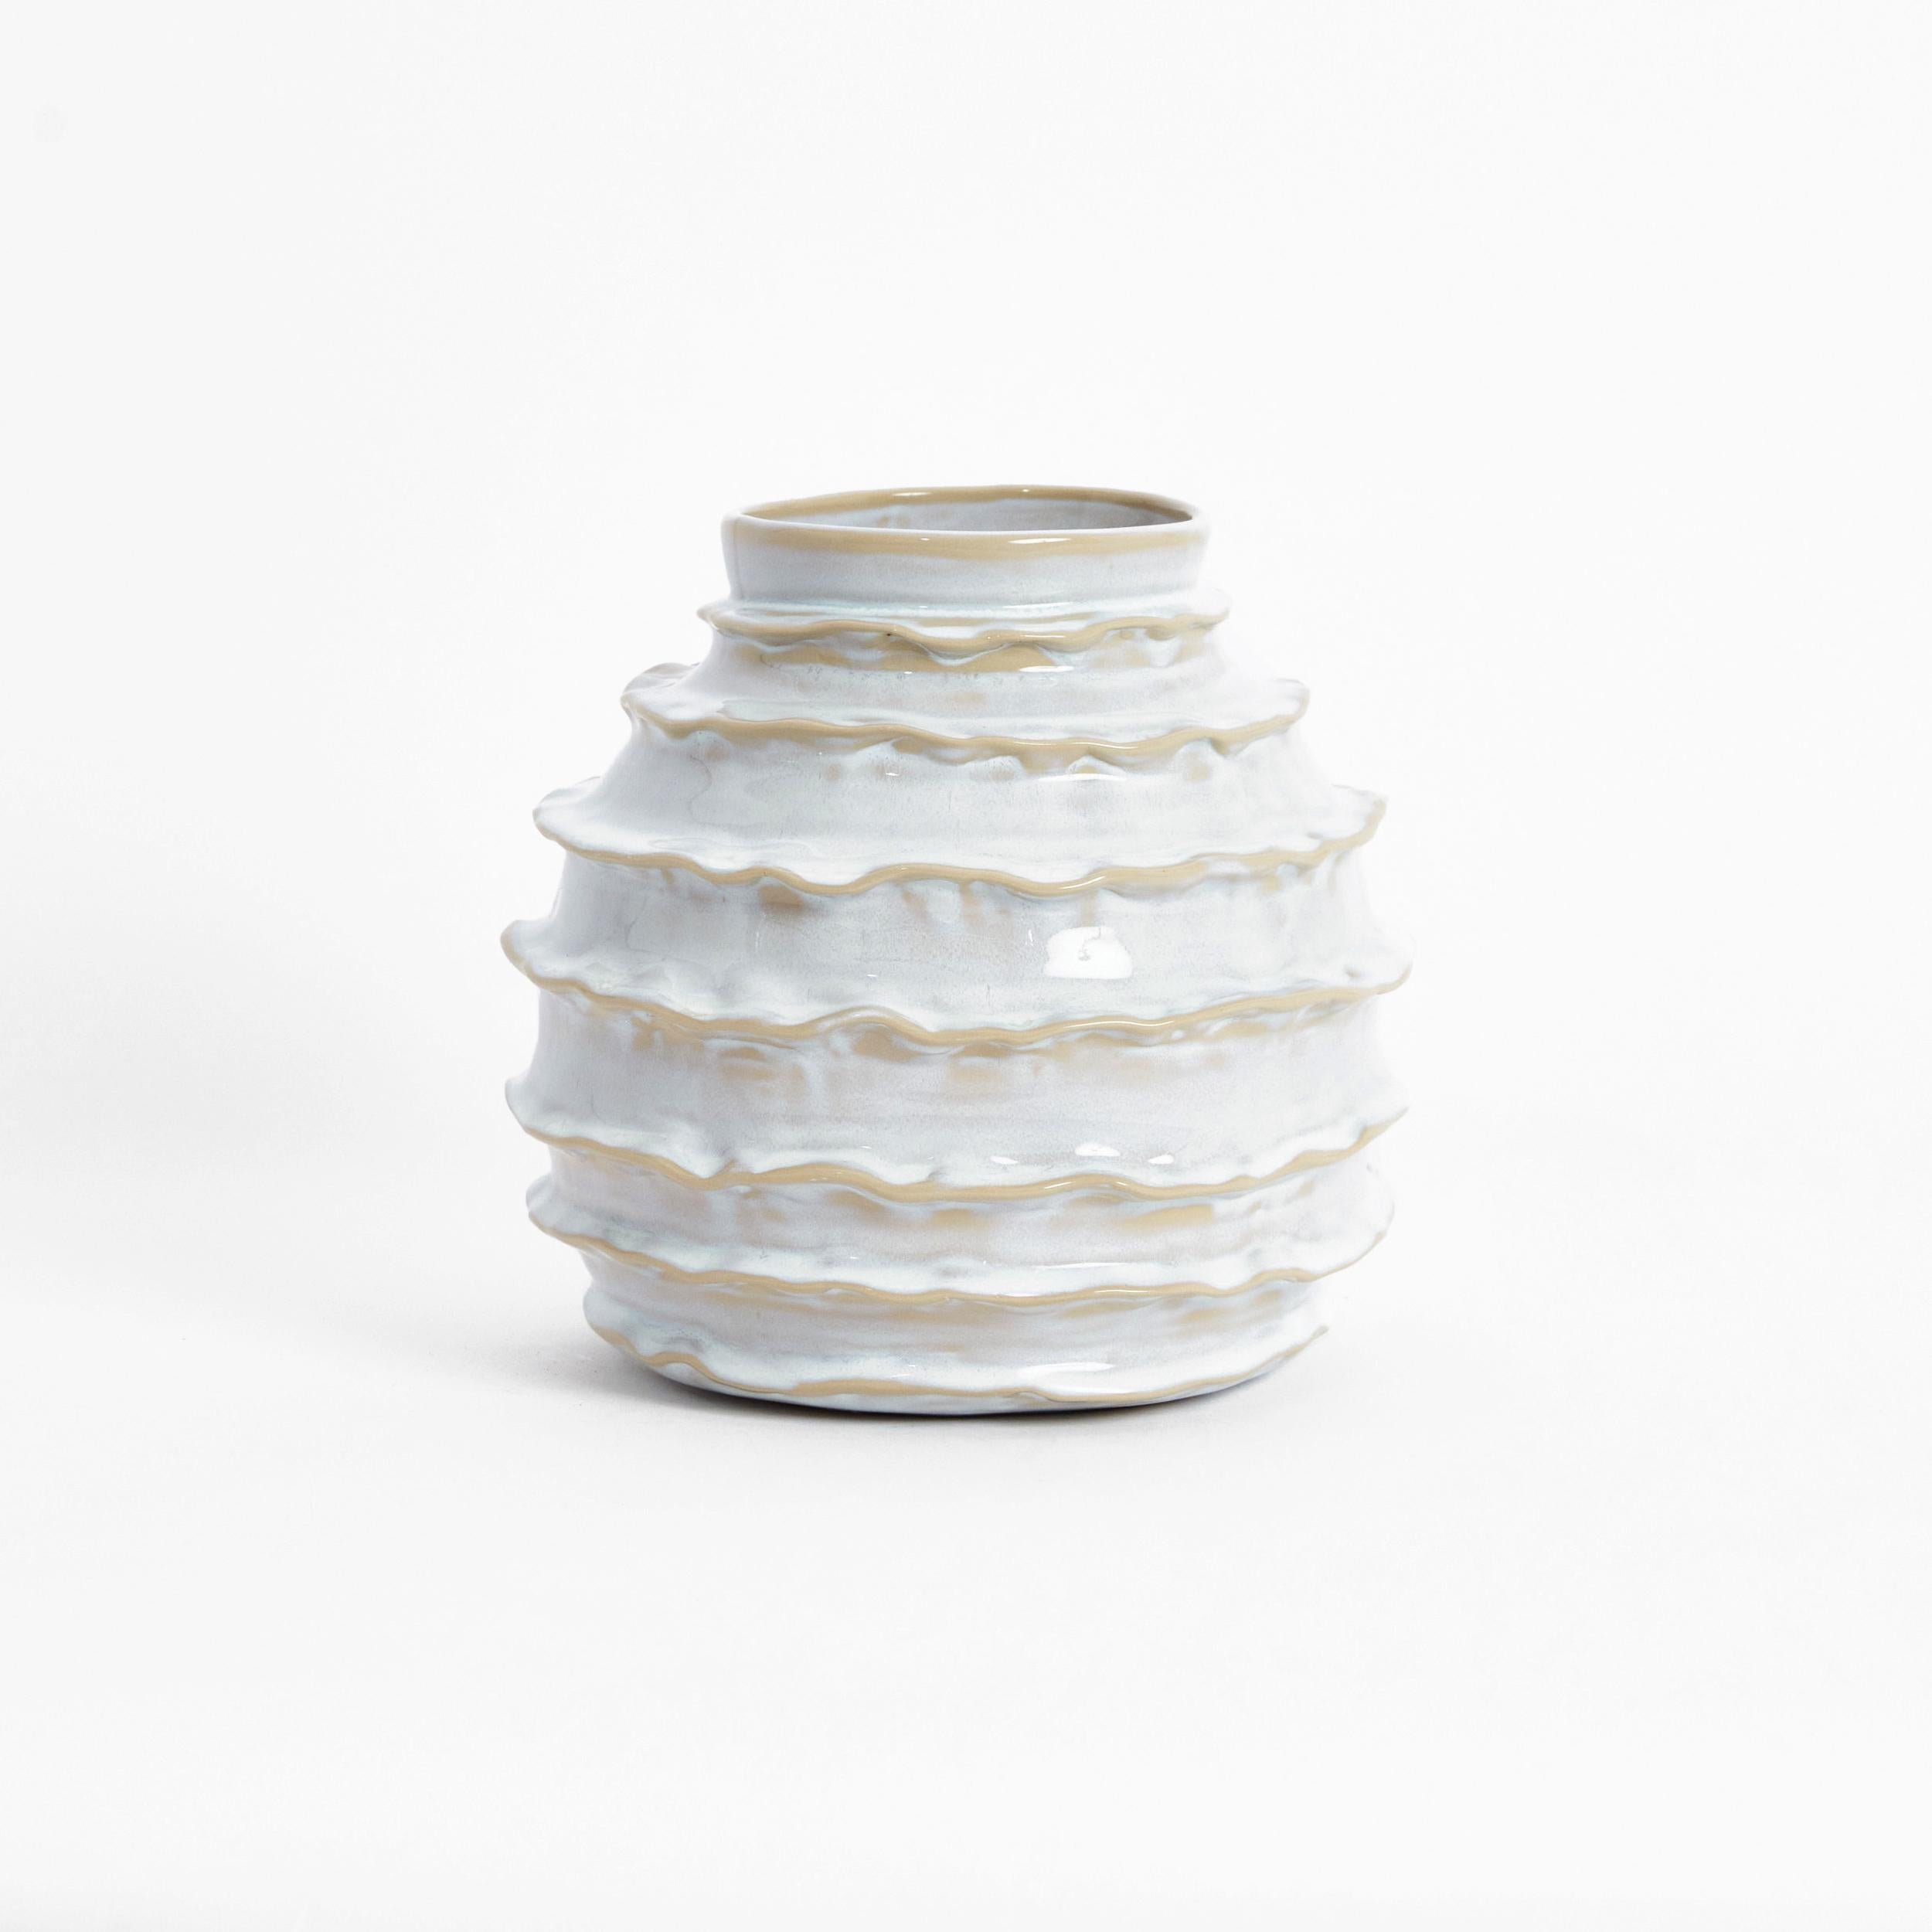 Holiday vase in shiny white.

Designed by Project 213A in 2021 handmade stoneware.

The oval vase, ruffled on the edges brings about contrast of lightness. This hand made and embellished vase is finished with a contemporary shiny white glaze which